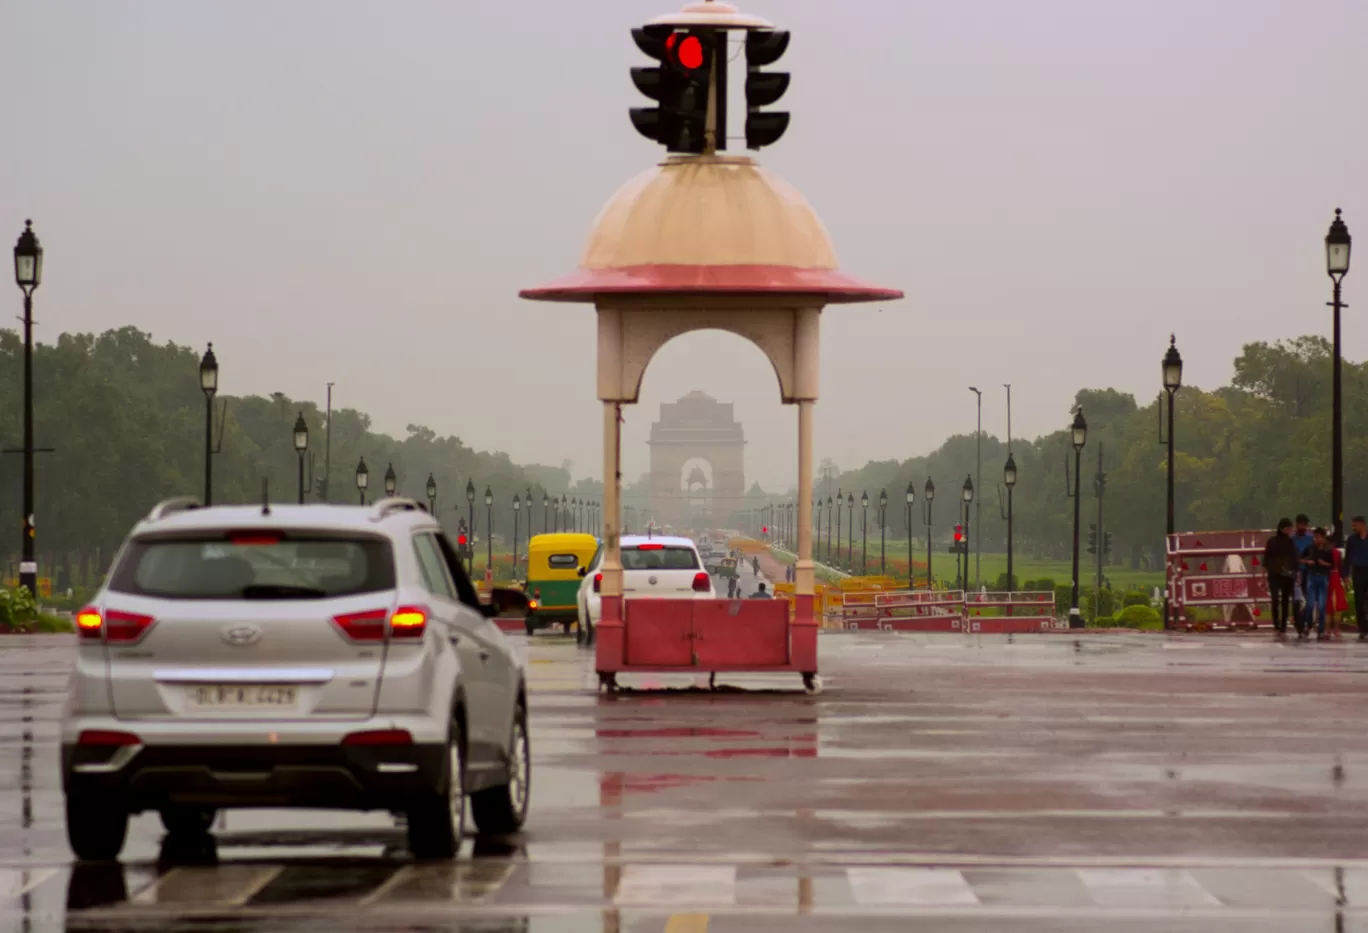 Photo of India Gate By sachin chauhan